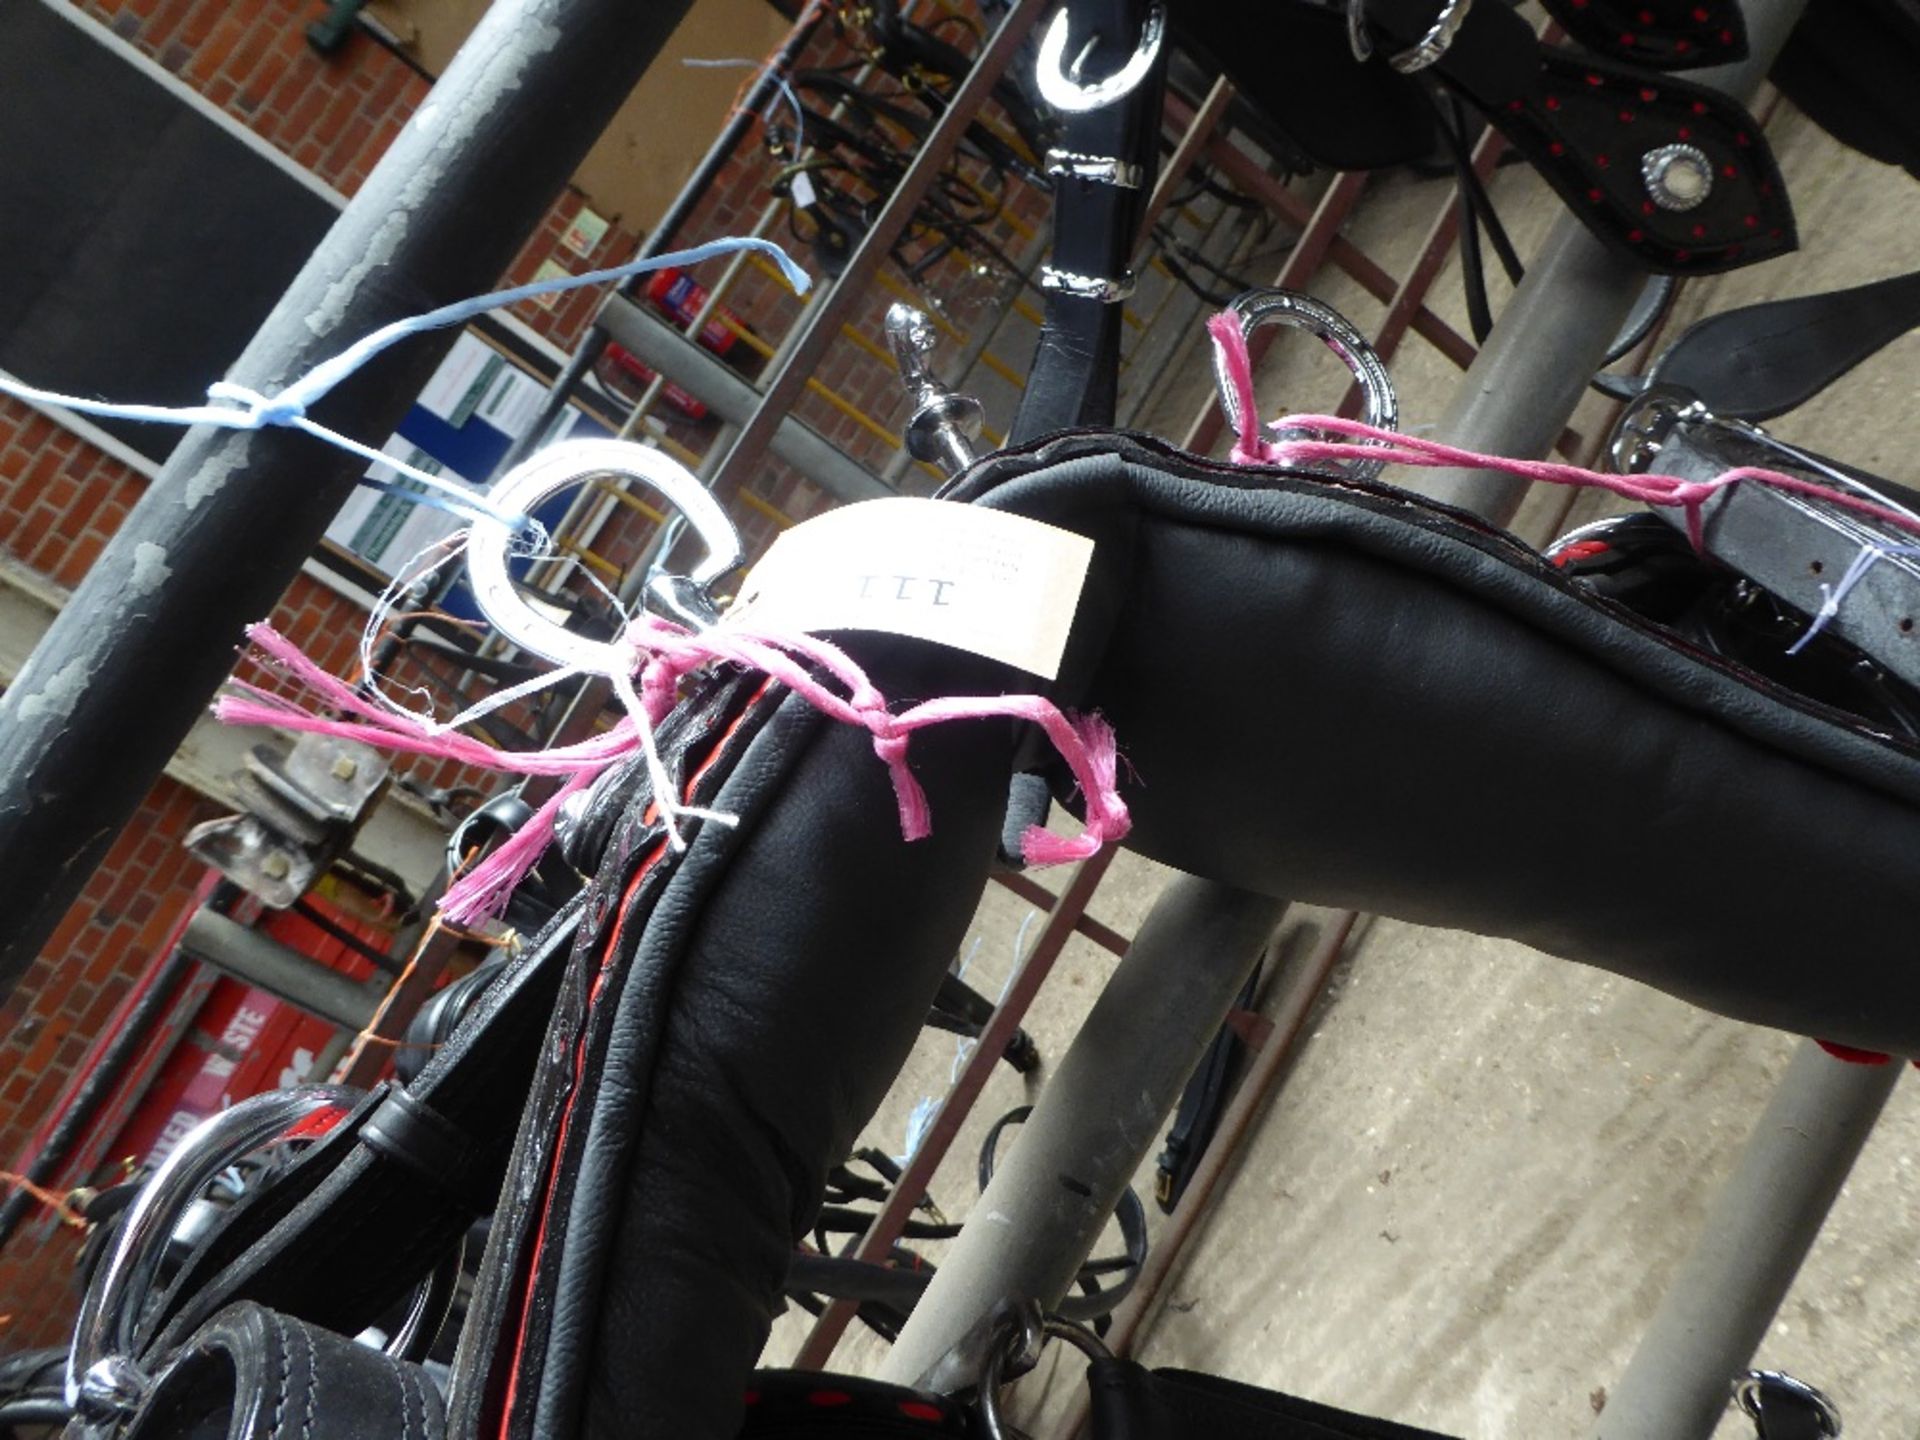 Set of black/red trade harness with white metal horseshoe fittings, 22ins collar - carries VAT - Image 2 of 2